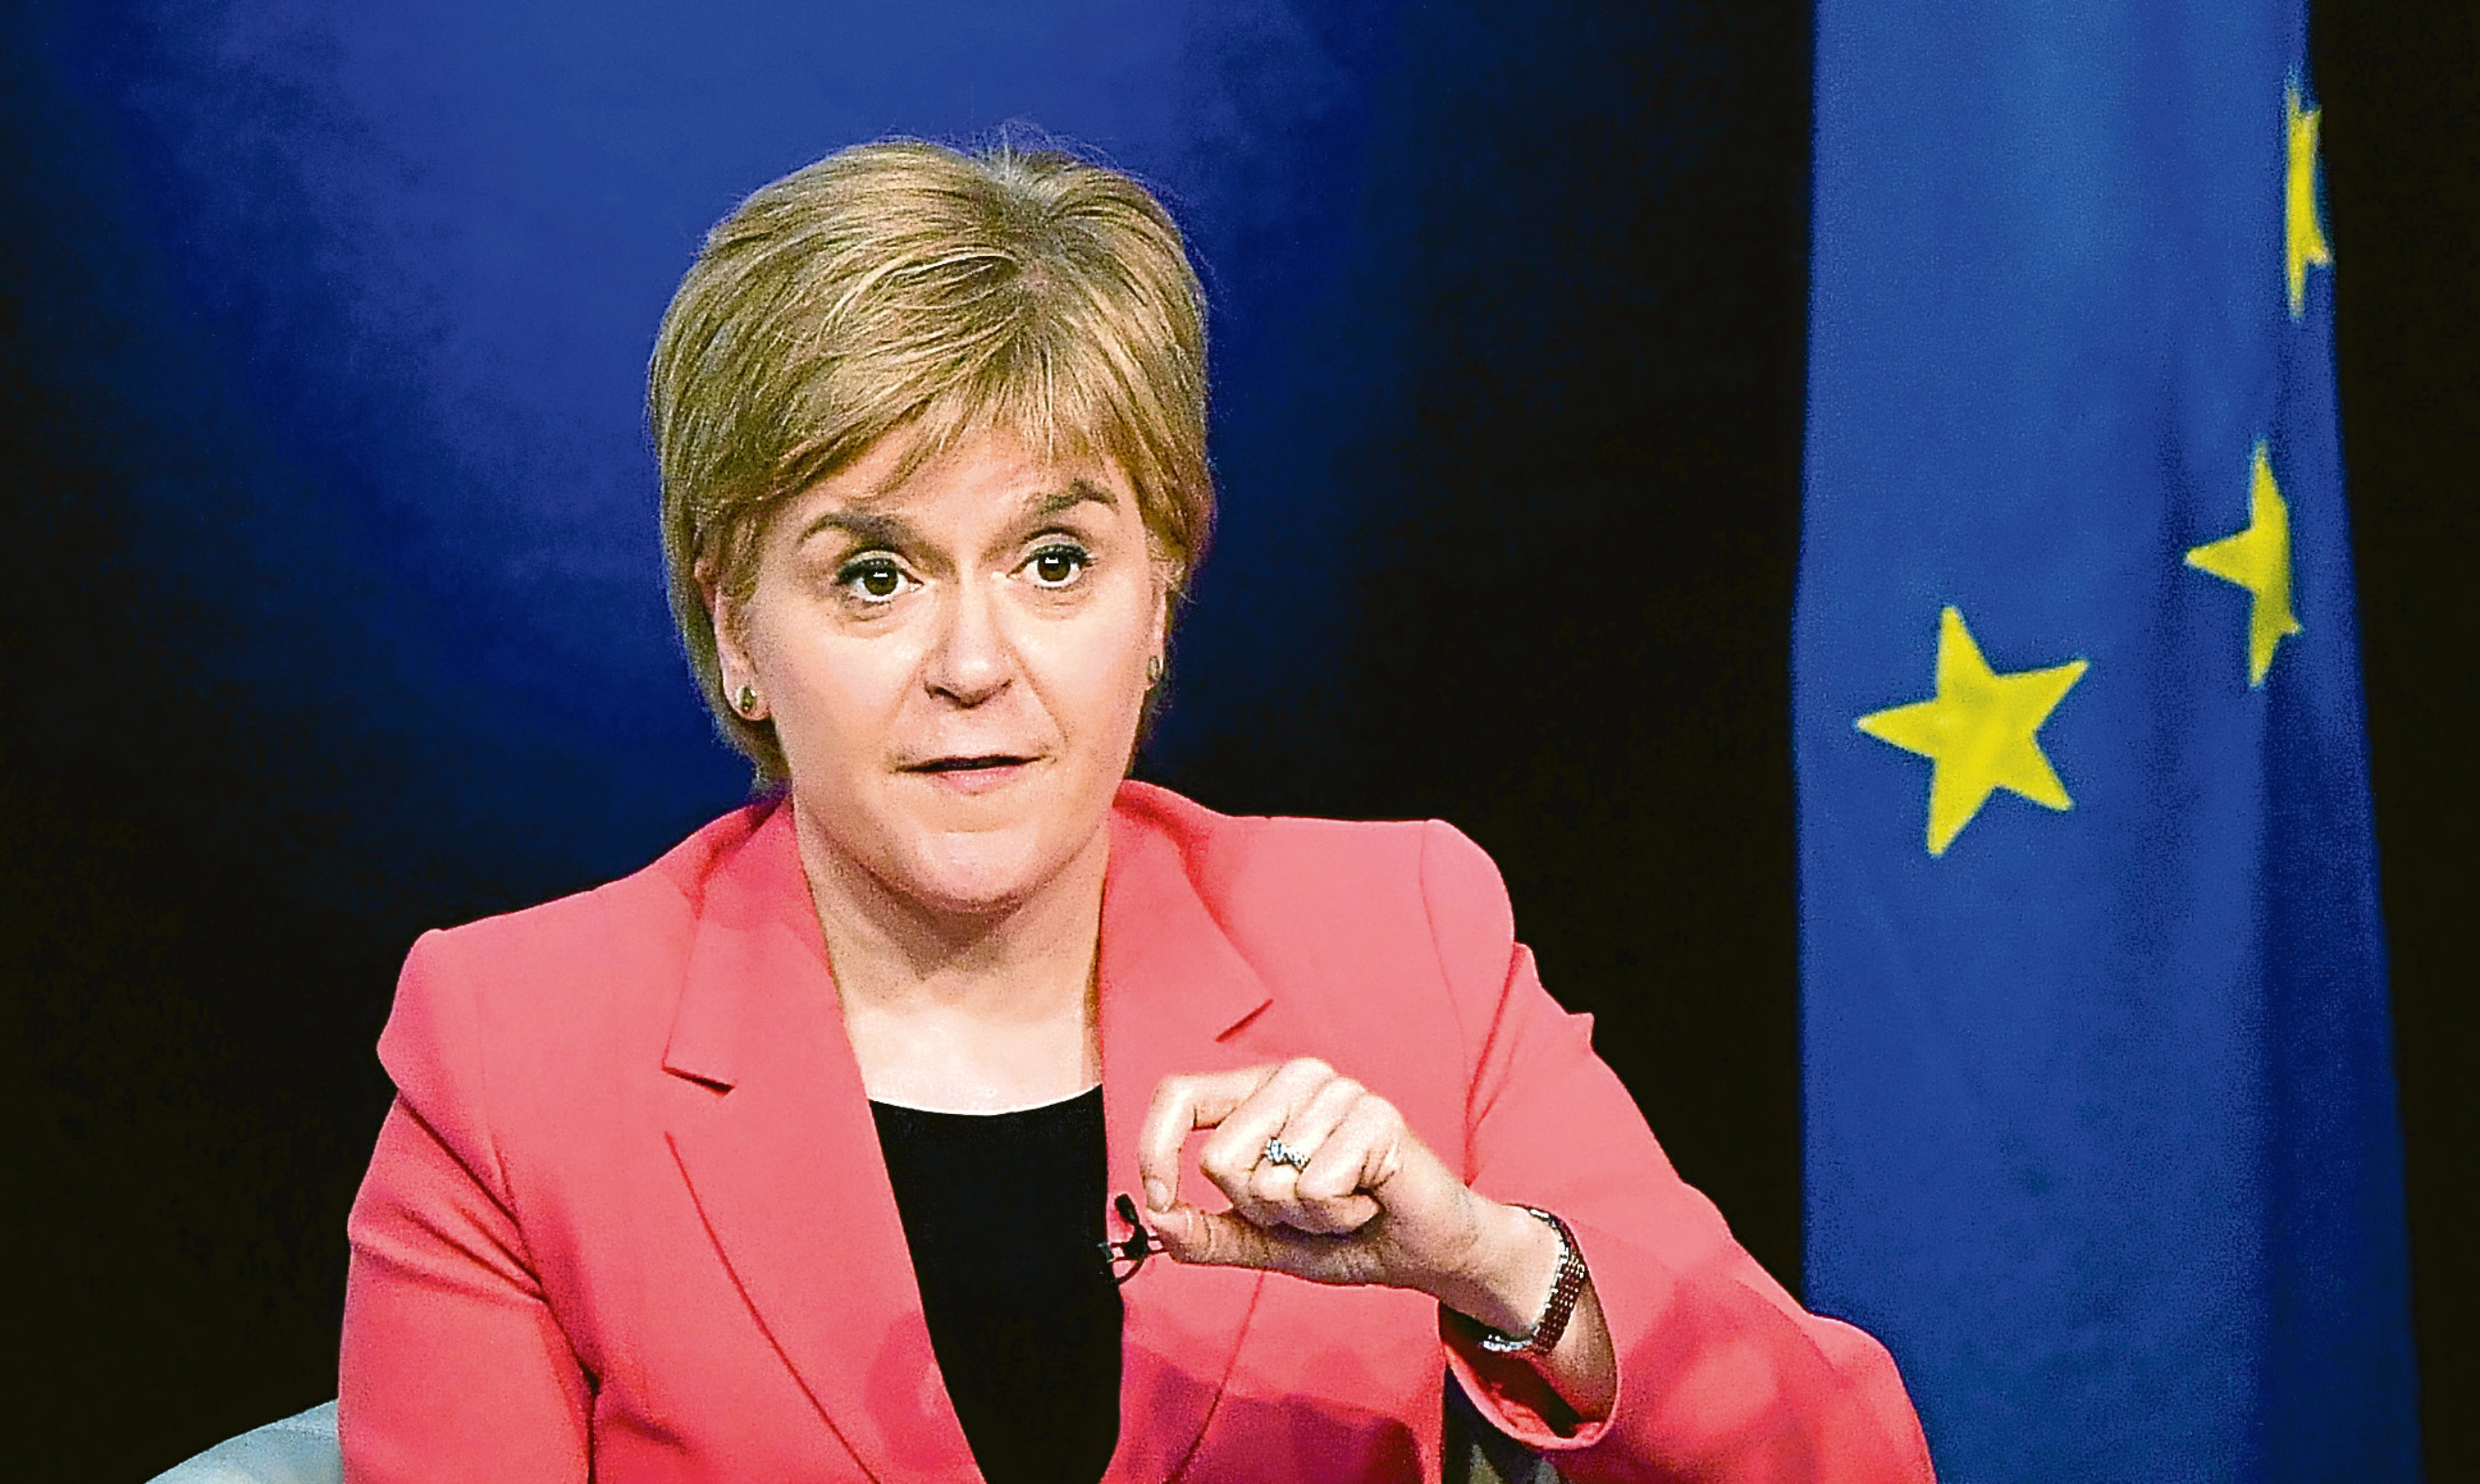 Nicola Sturgeon will unveil the Scottish Government's Brexit paper on Tuesday.